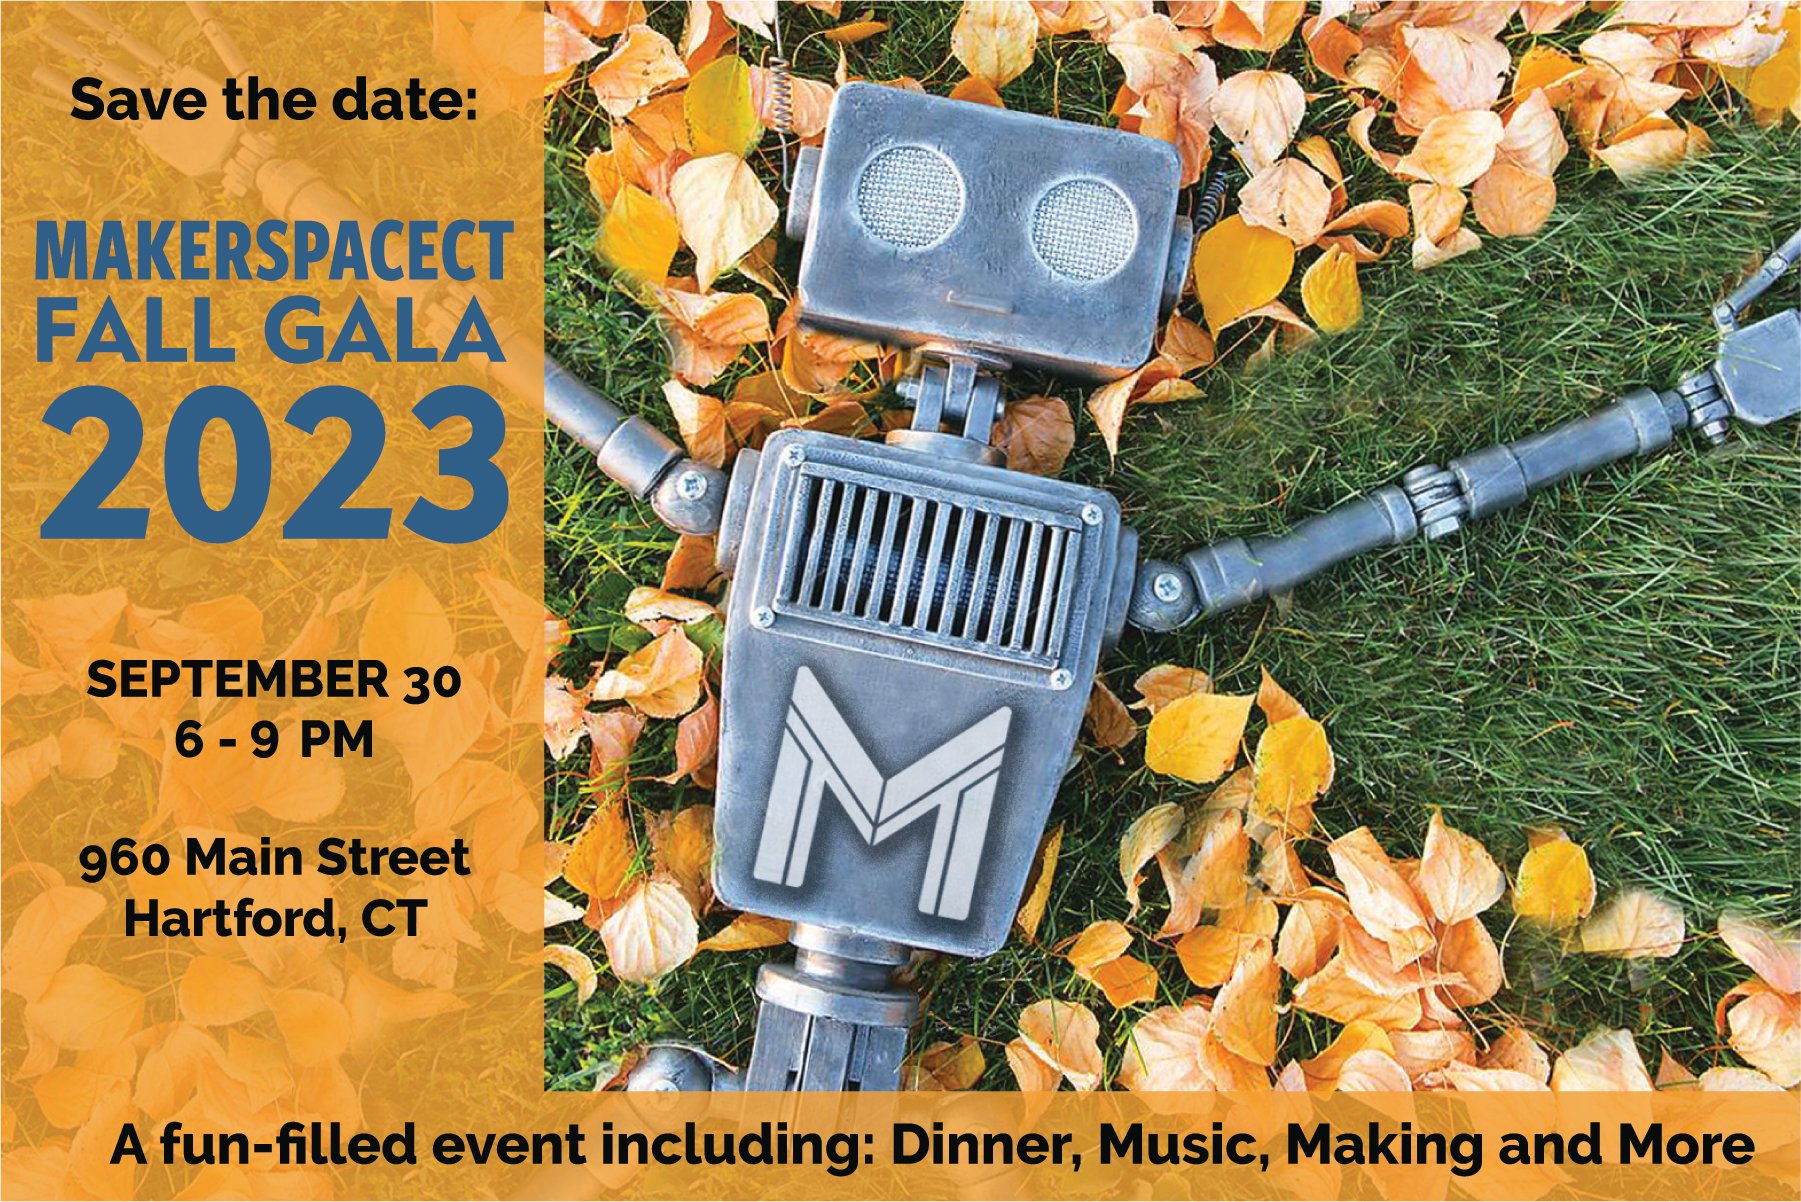 SAVE THE DATE - THE MAKERSPACECT GALA 2023 - 007